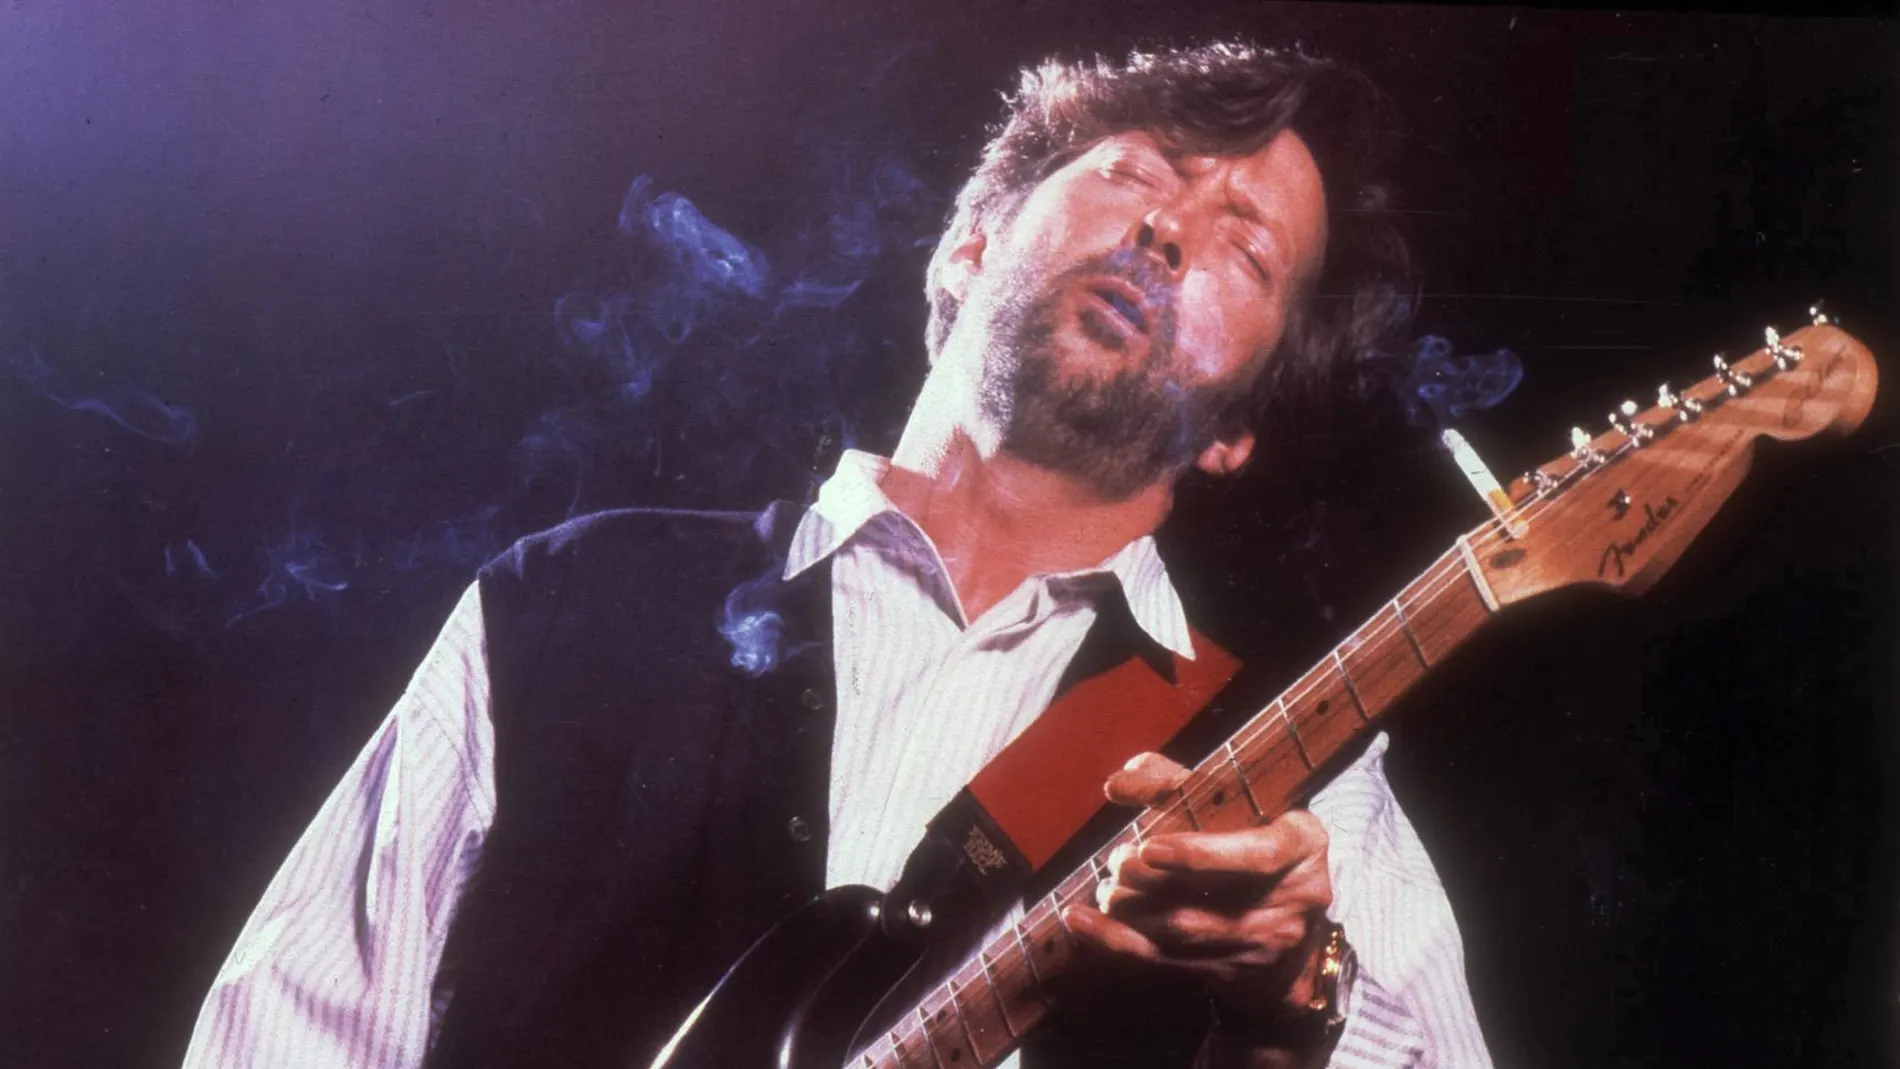 Guitar legend Eric Clapton plays his 1986 pewter Fender Stratocaster